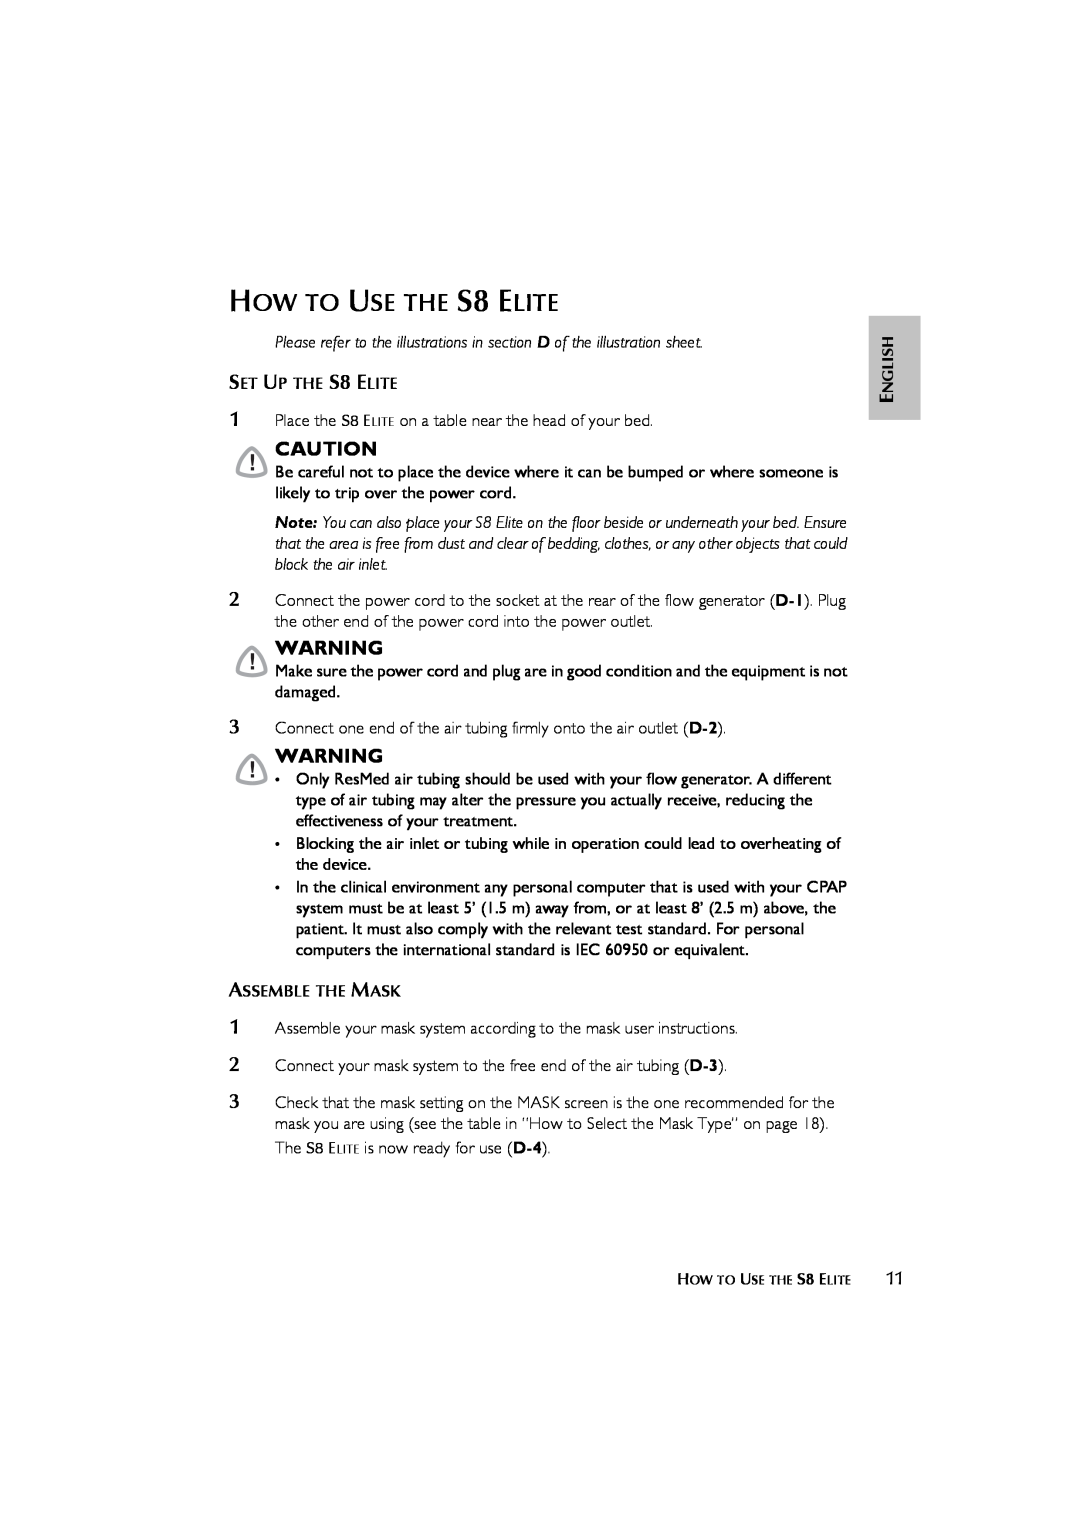 ResMed s8 user manual HOW TO USE THE S8 ELITE, SET UP THE S8 ELITE, Assemble The Mask, English 